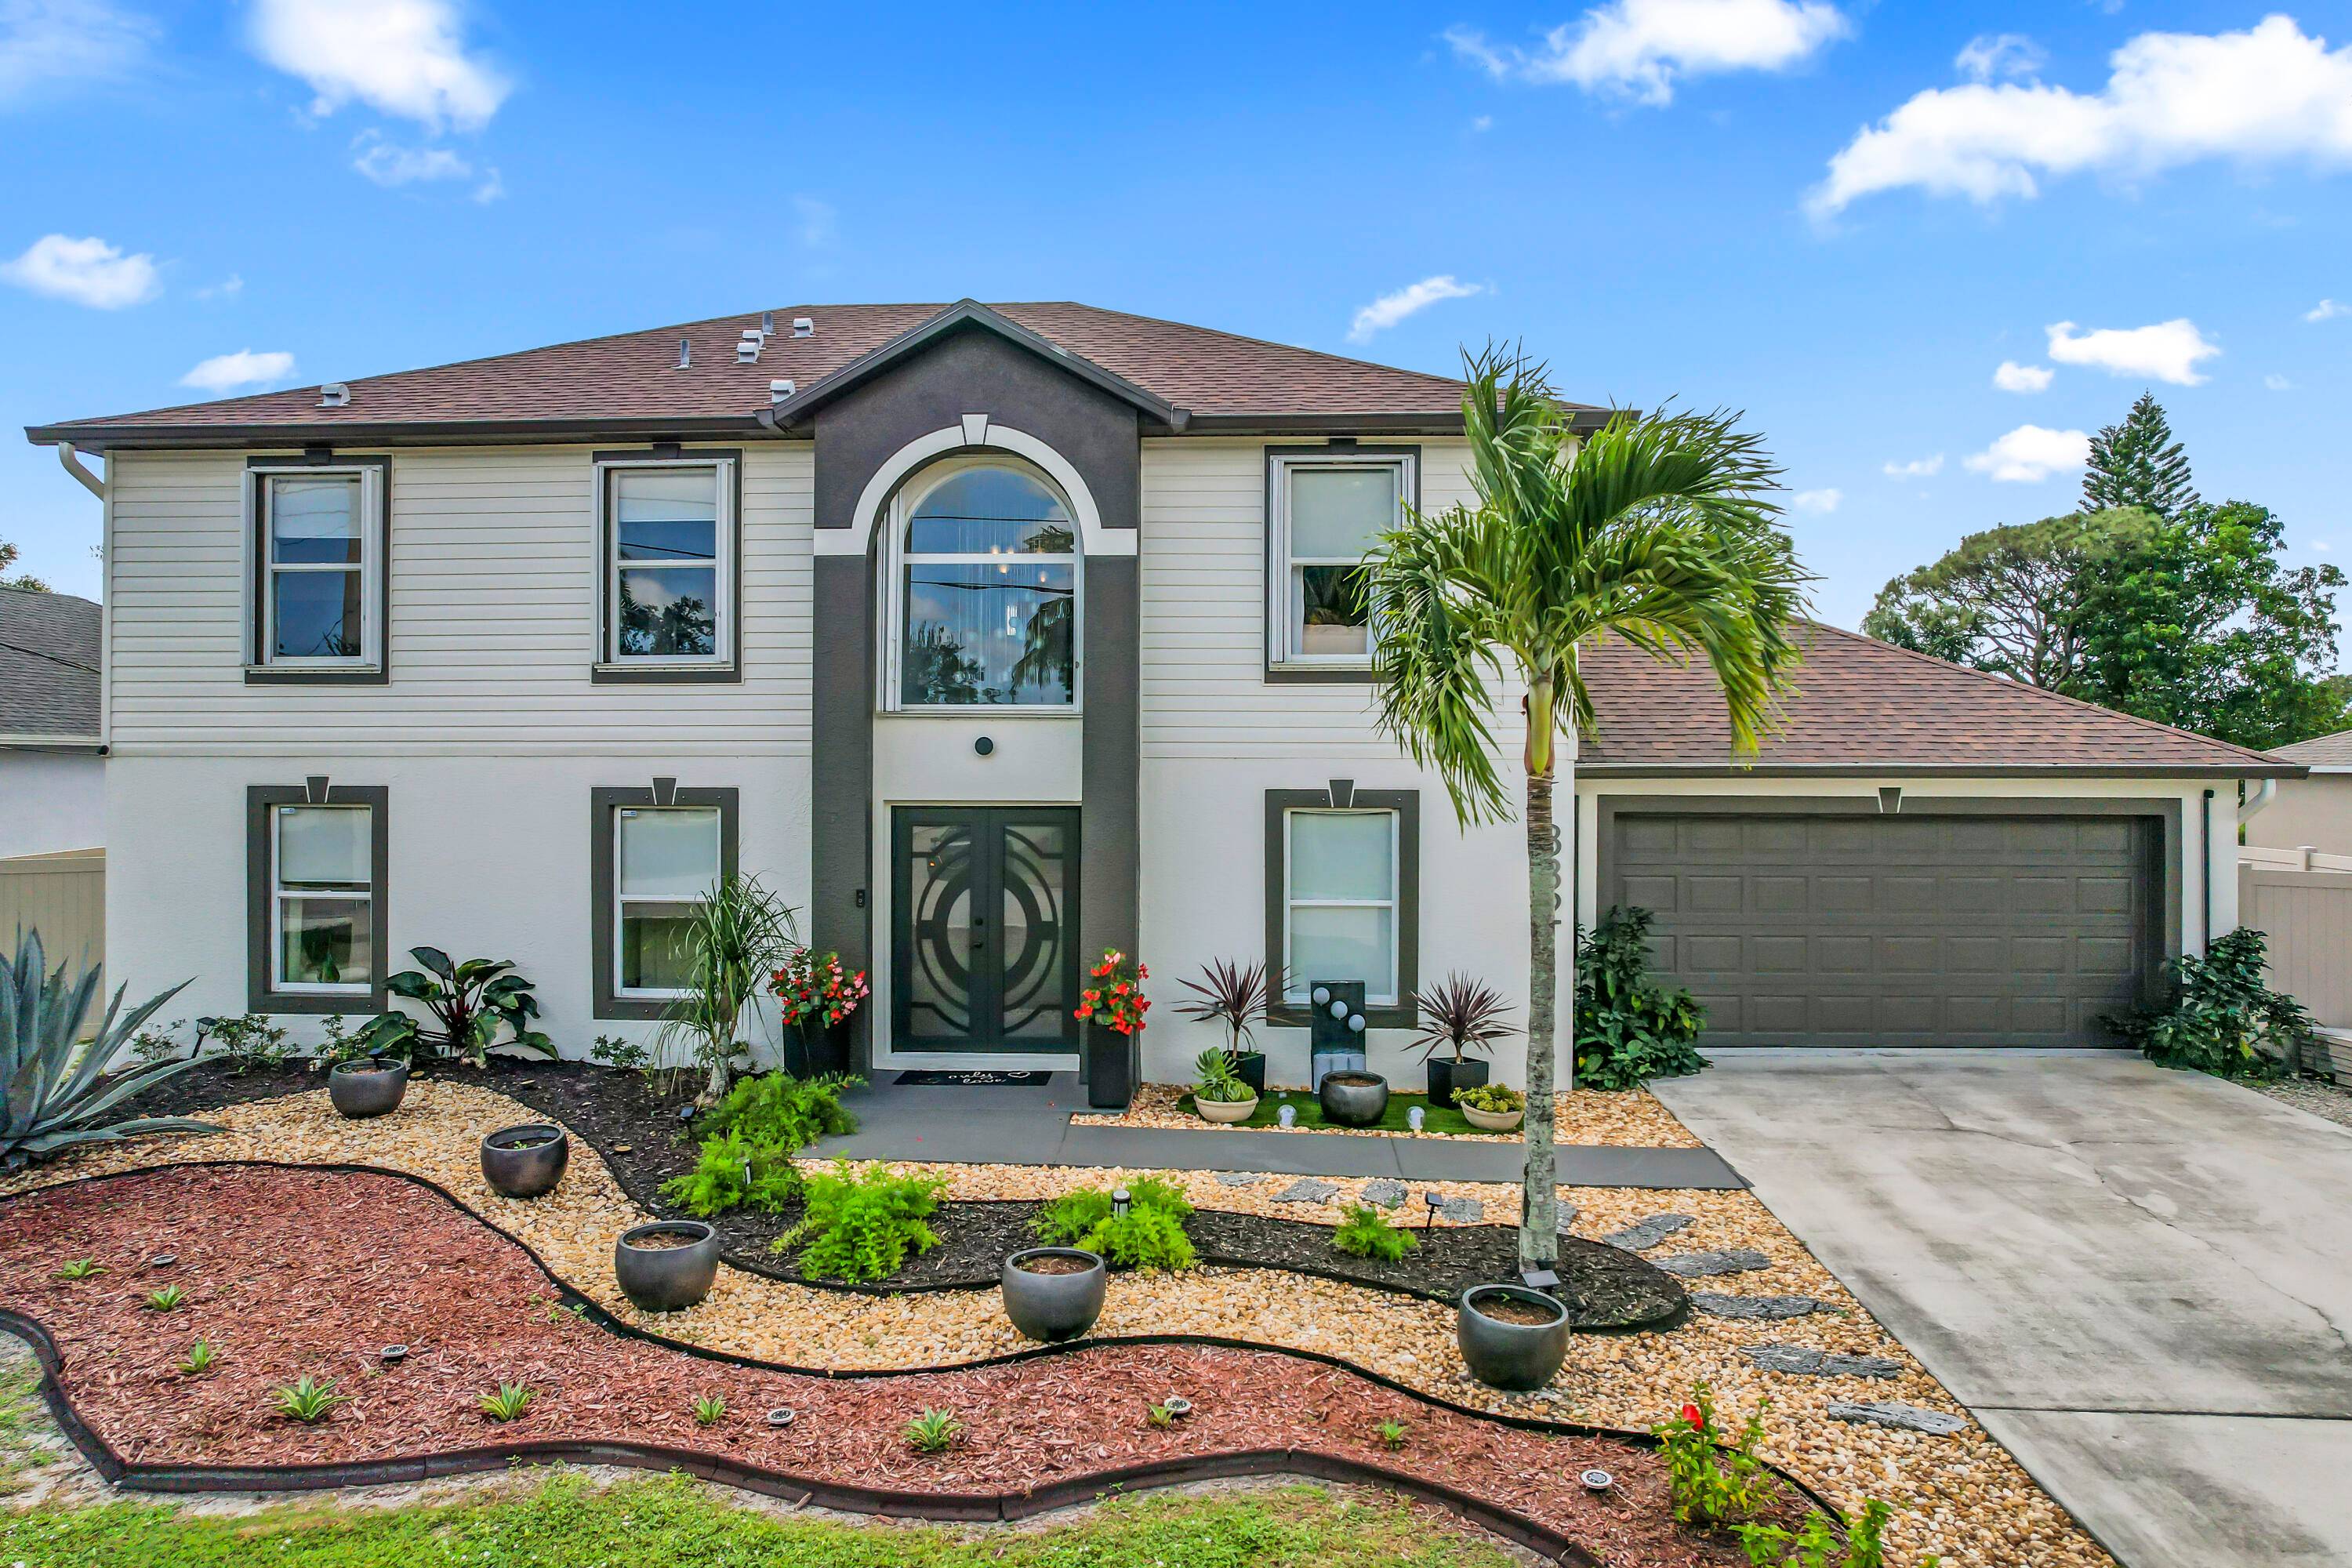 Welcome home to this completely upgraded modernized turnkey home.